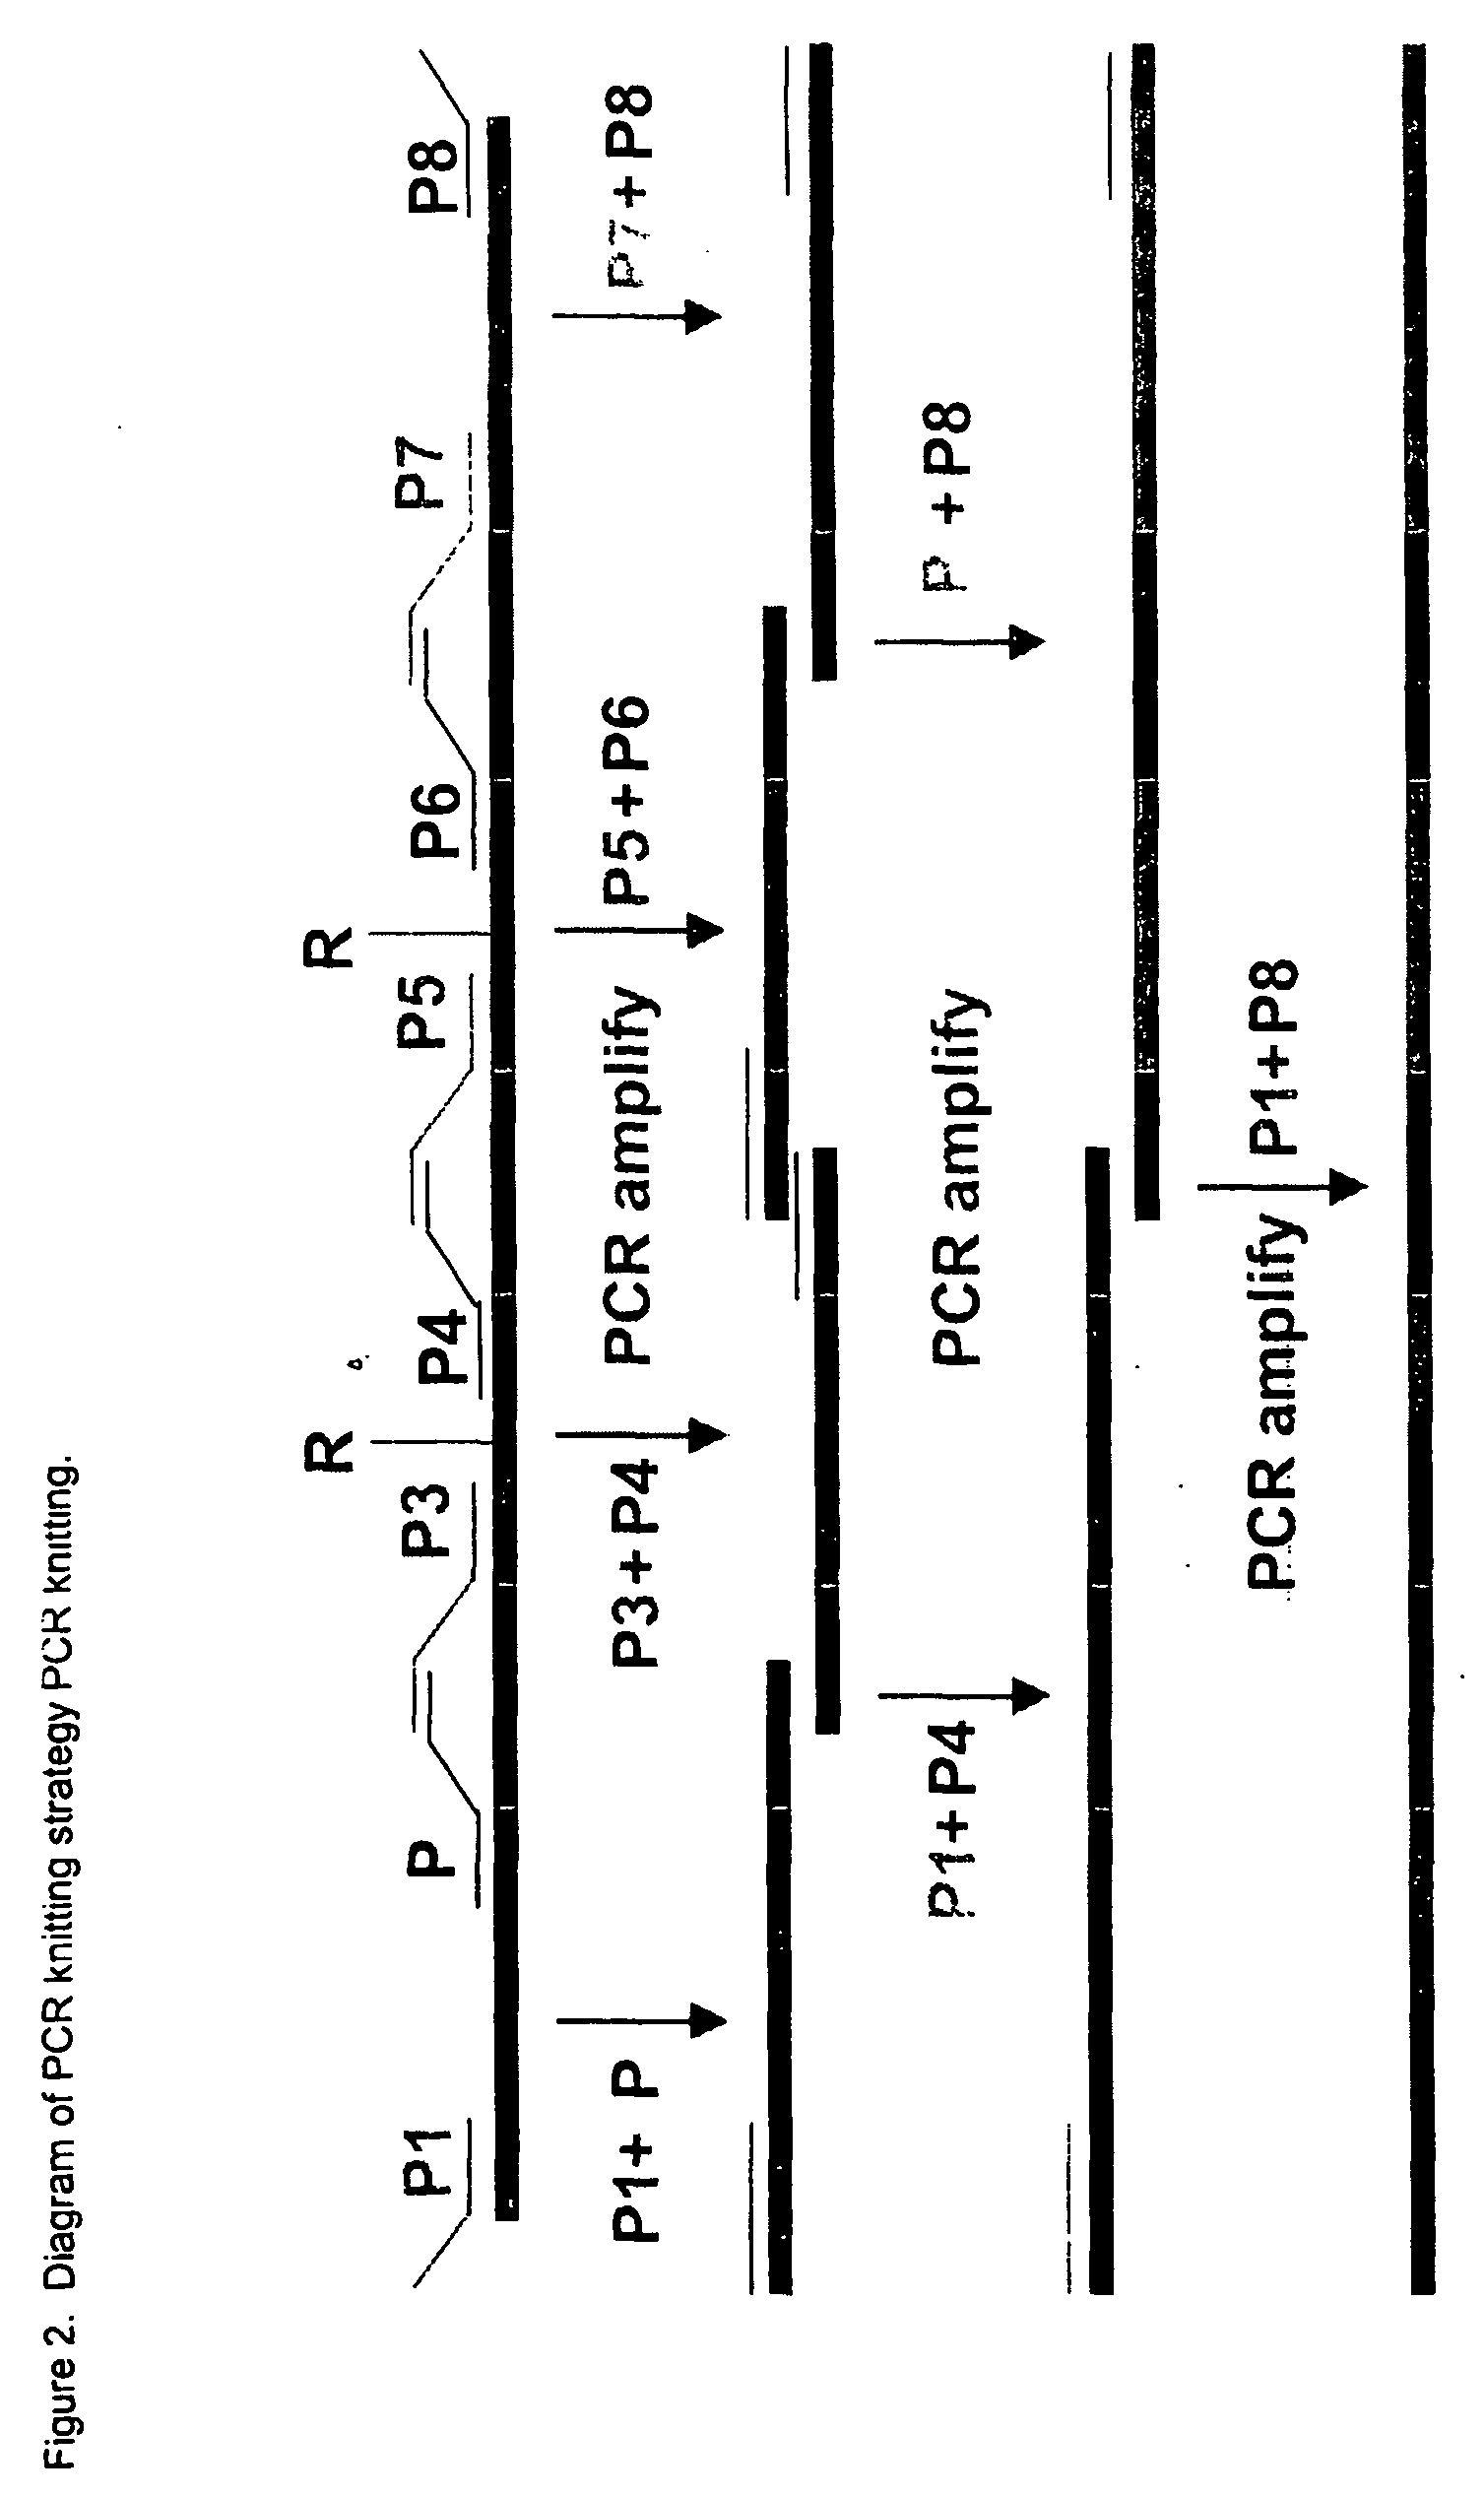 Thrombopoietin(tpo) synthebody for stimulation of platelet production